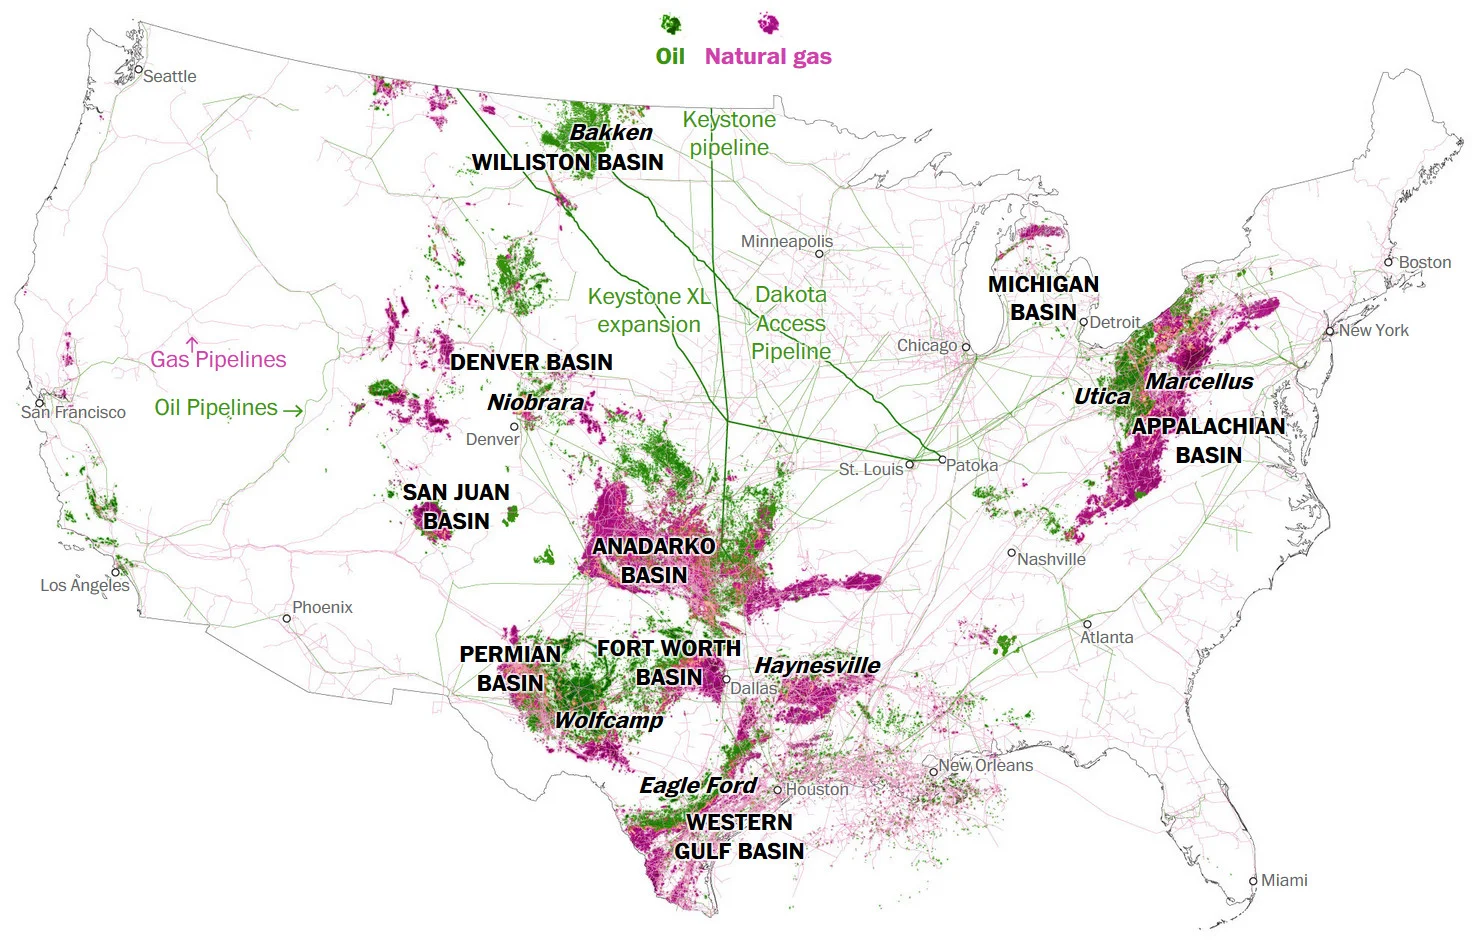 Every active oil and gas well in the U.S.